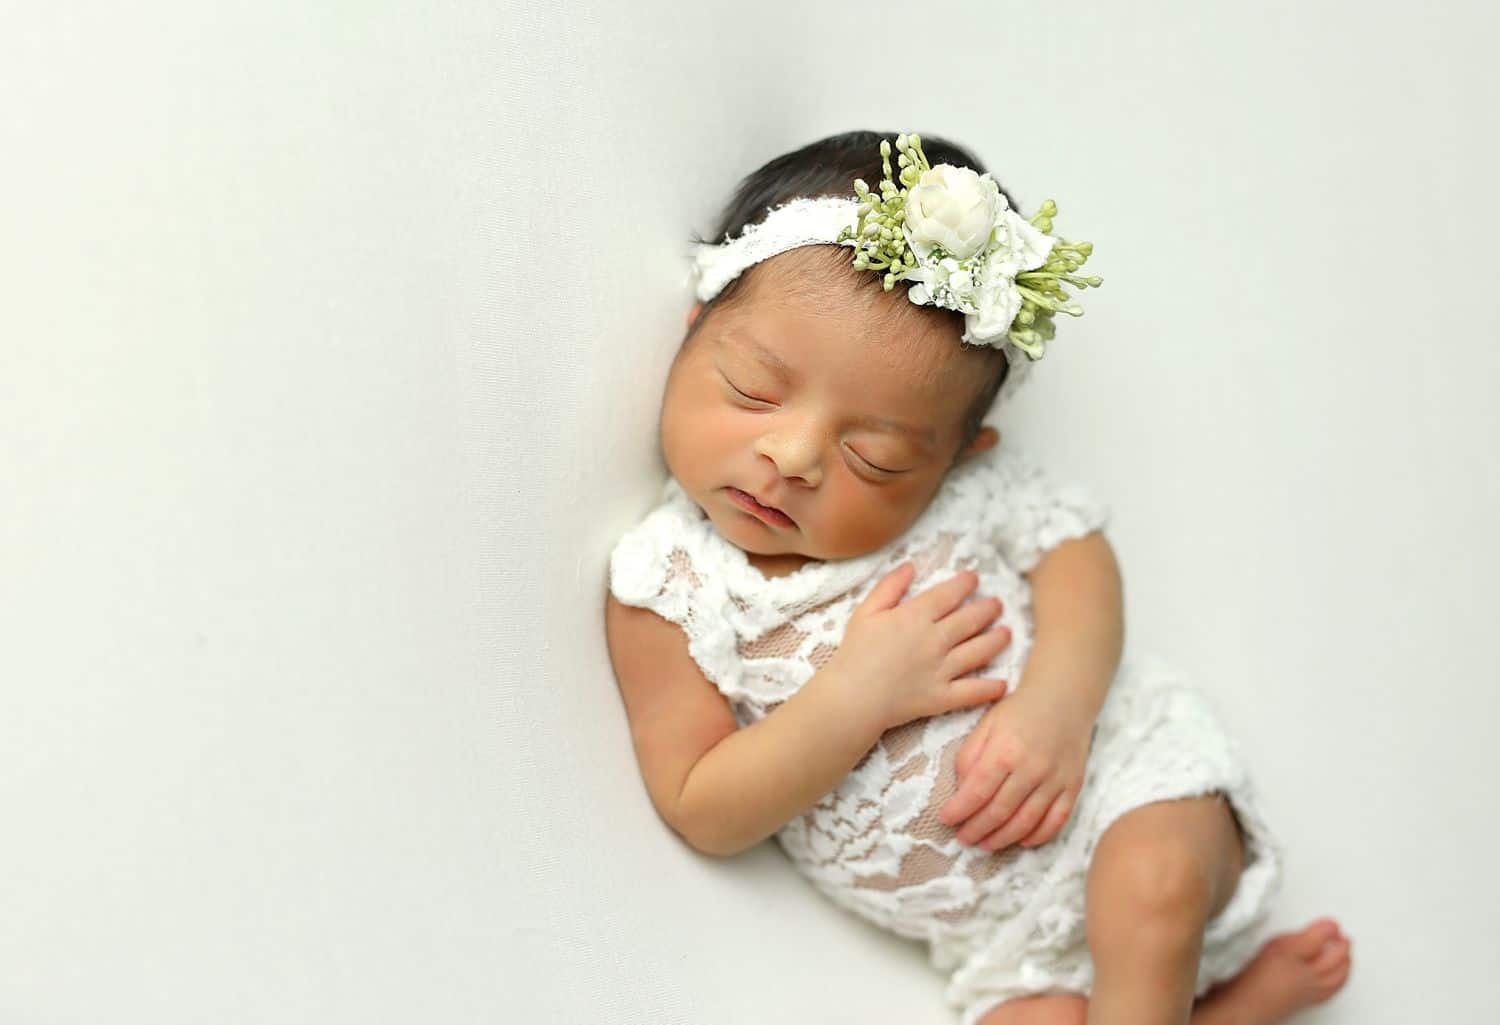 How To Attract New Clients In 3 Bold Business Moves: Baby with flower headband by Cassie Clayshulte